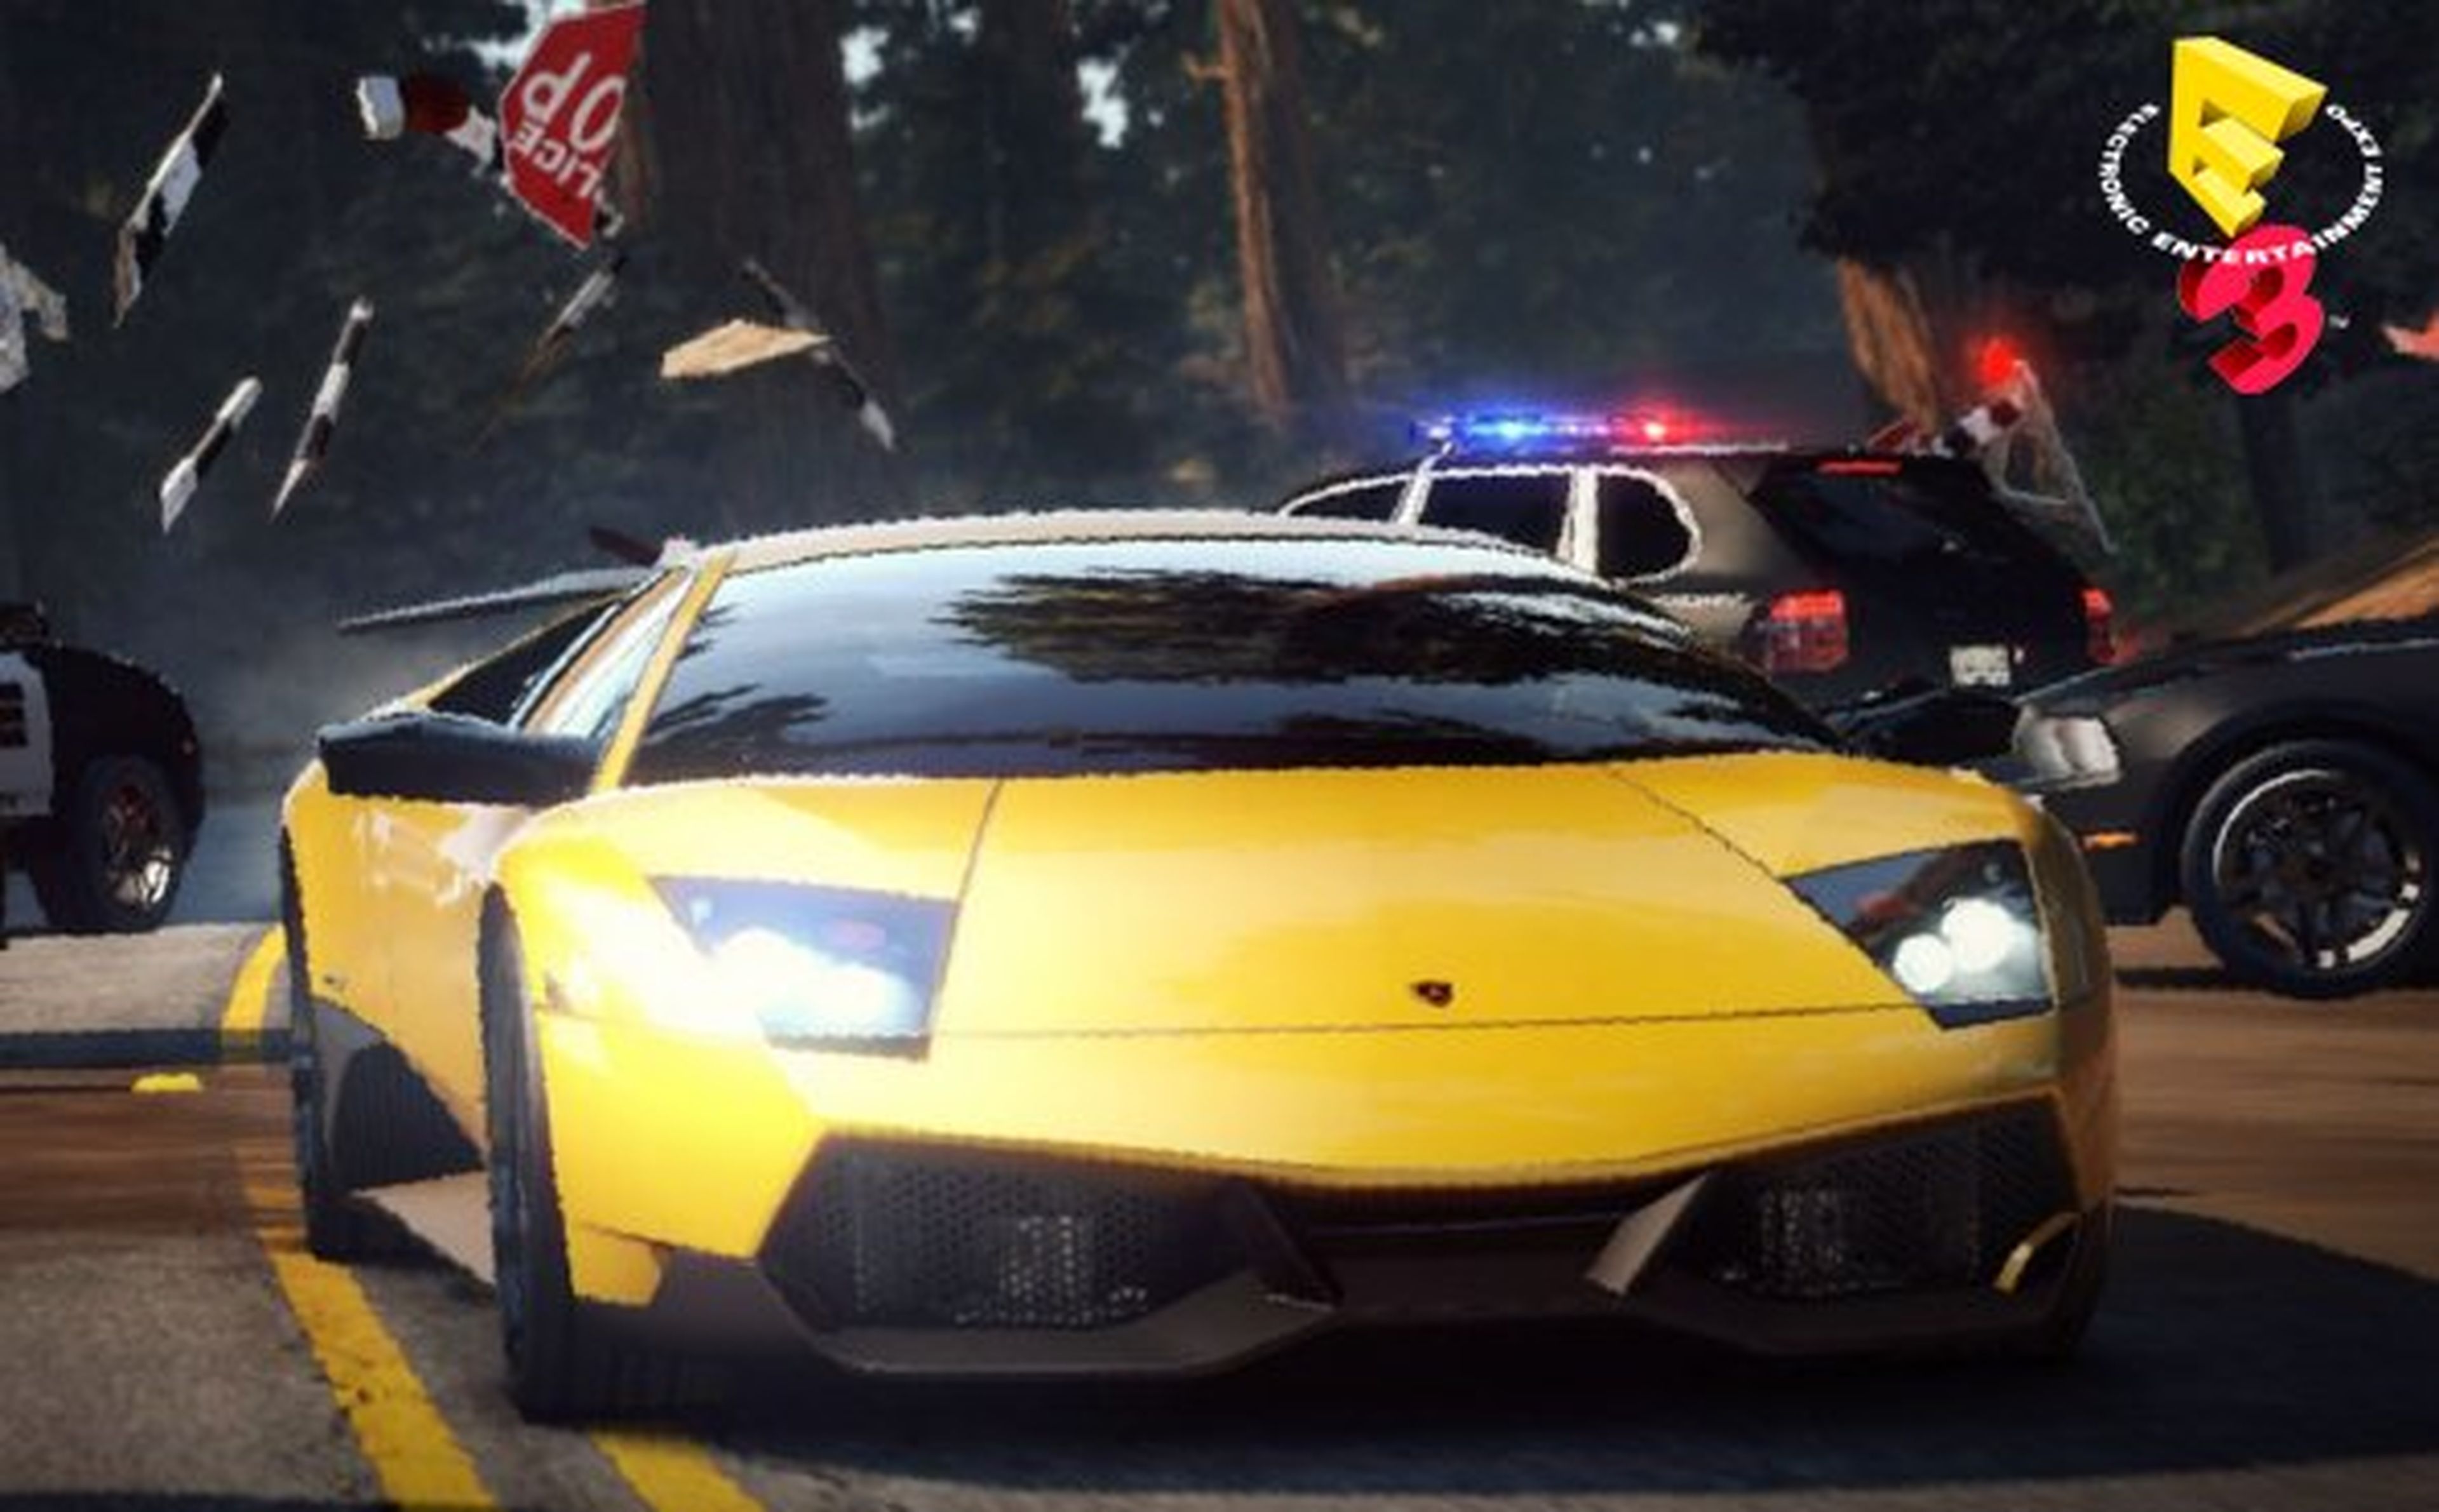 Vuelve Need for Speed Hot Pursuit